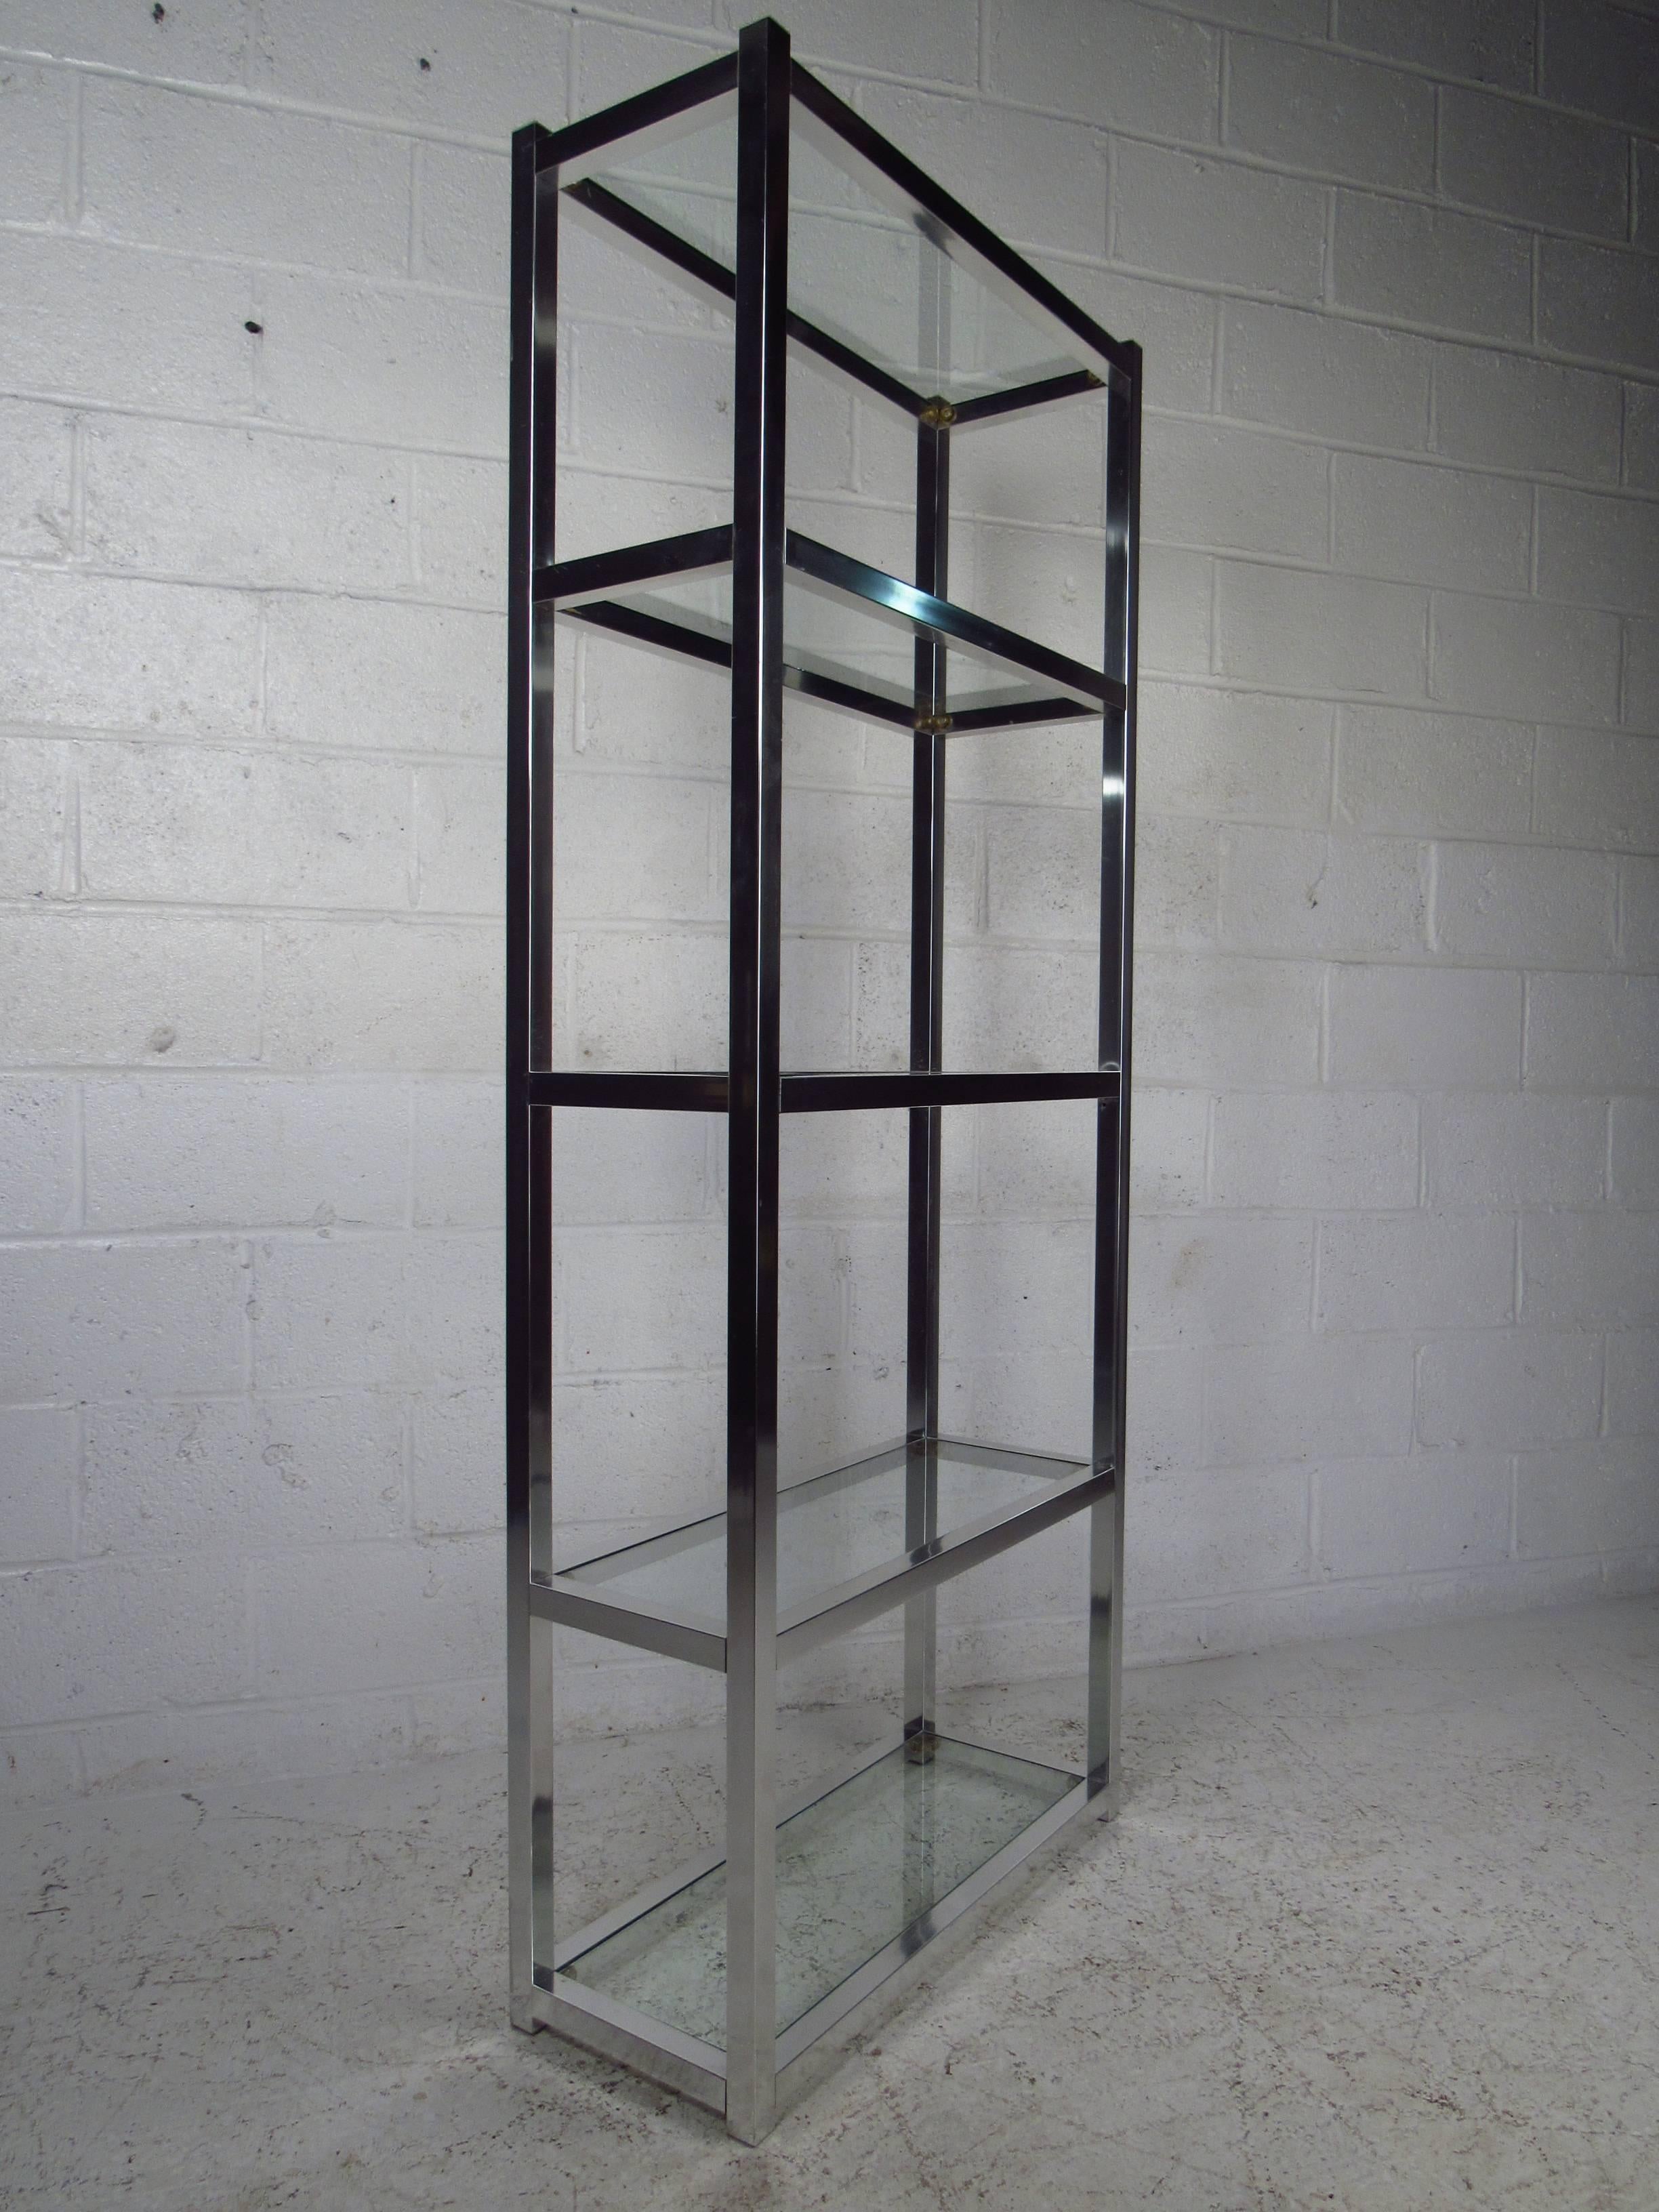 This gorgeous étagère is constructed with brushed aluminum and features five glass shelves, making it ideal for storefront or a living room display case. The stylish and sturdy design fits well in any home or business setting. (Please confirm item